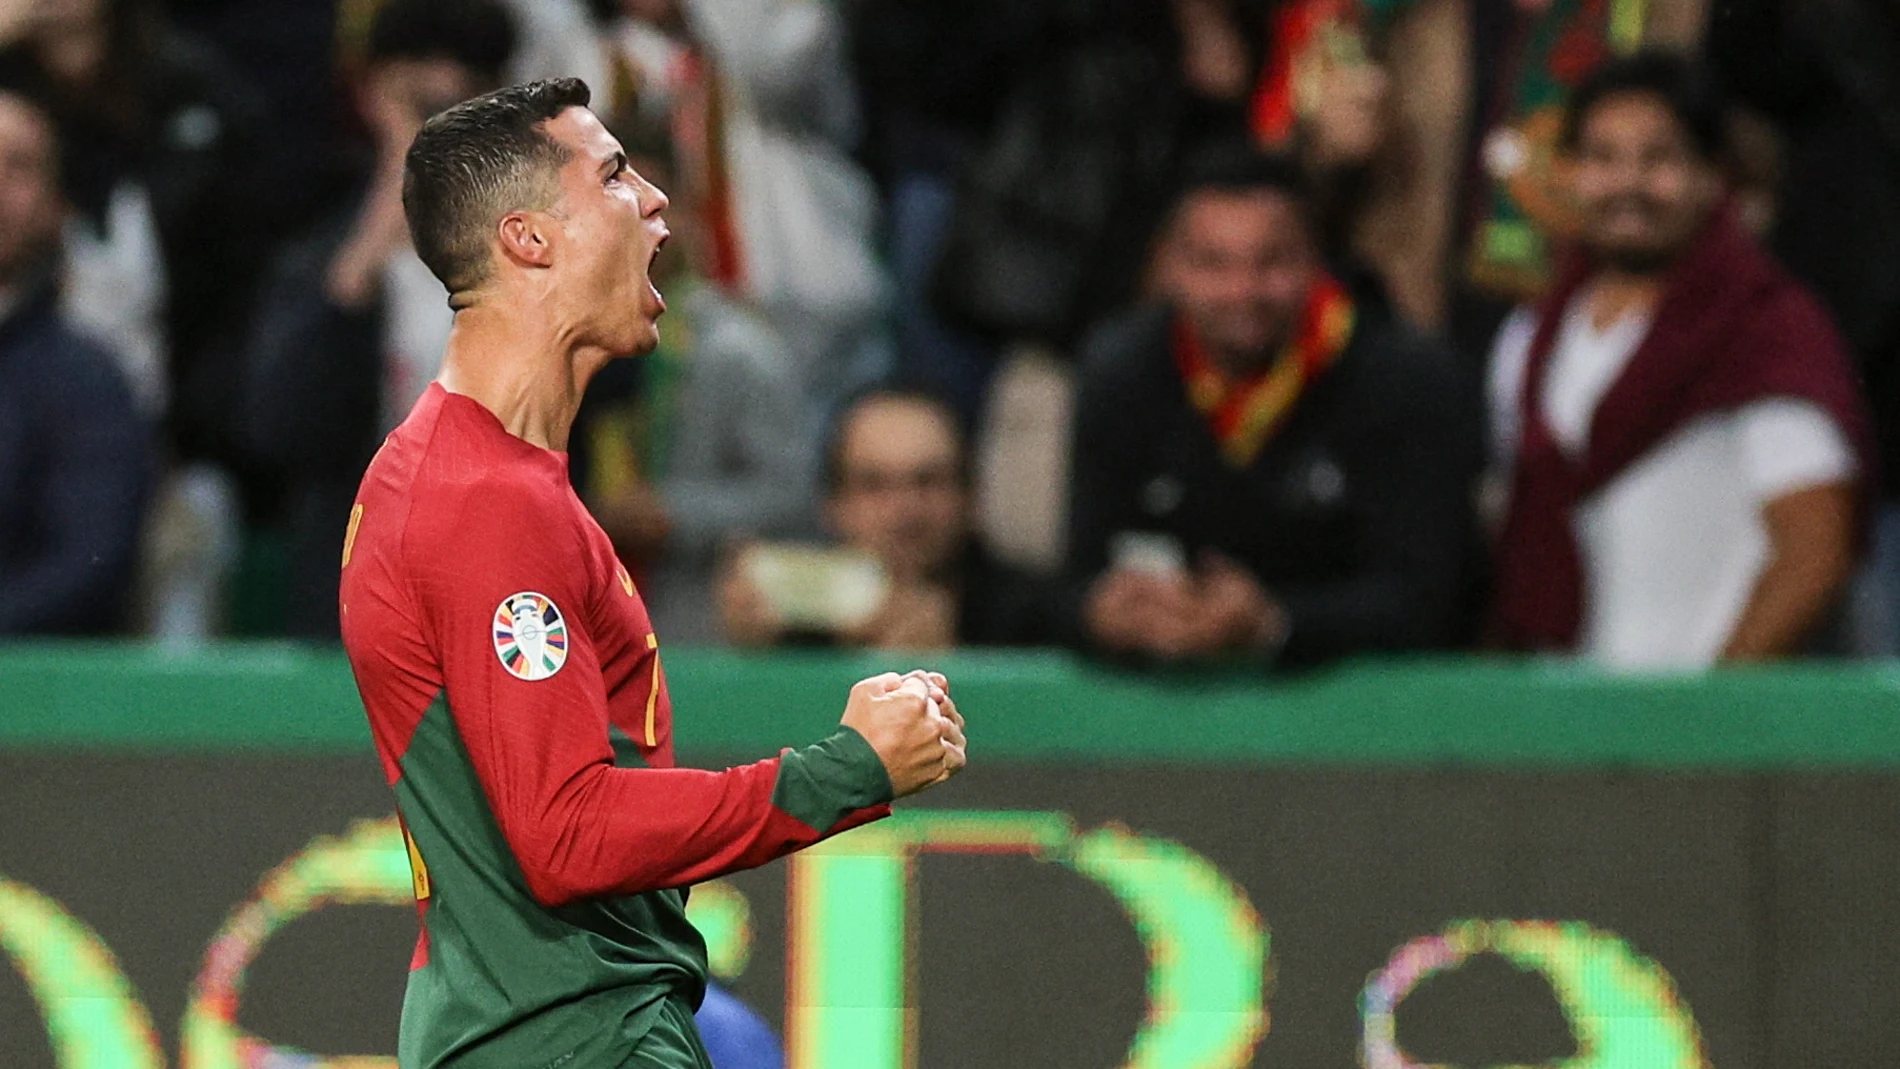 Lisbon (Portugal), 23/03/2023.- Portugal's Cristiano Ronaldo celebrates after scoring a goal during the UEFA EURO 2024 qualification match between Portugal and Liechtenstein, in Lisbon, Portugal, 23 March 2023. (Lisboa) EFE/EPA/MIGUEL A. LOPES 